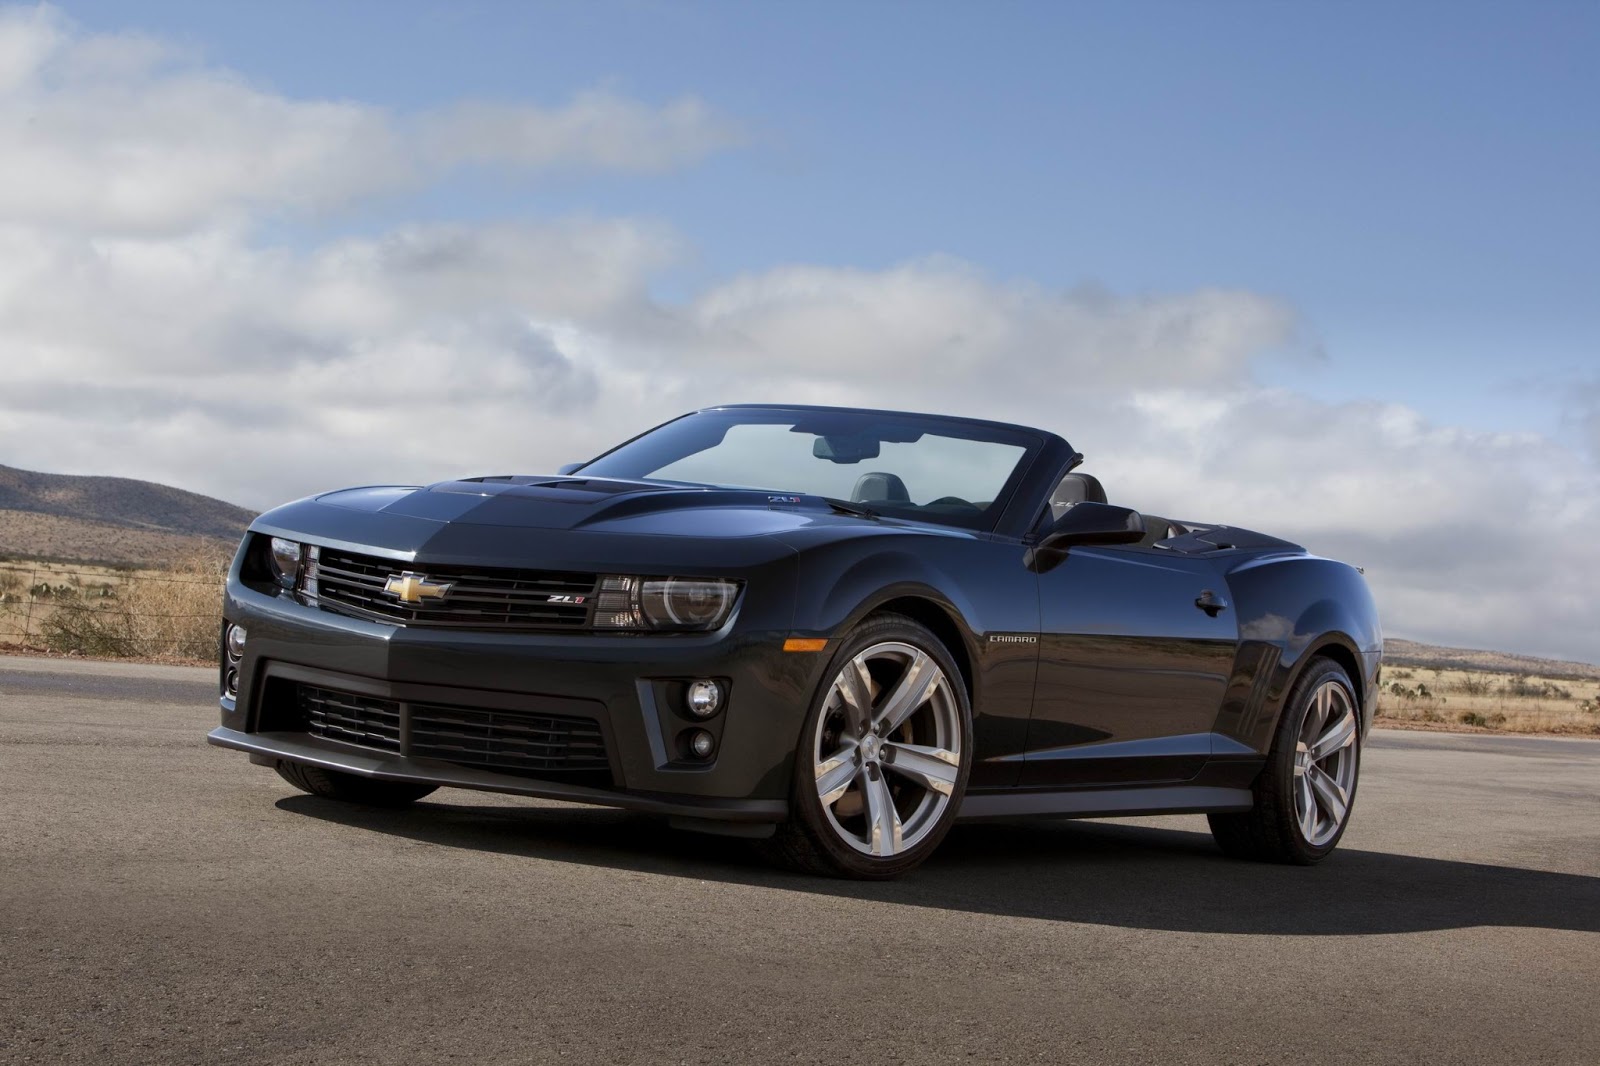 Cars-HD-Wallpapers: Chevrolet Camaro ZL1 2013 best HD picture